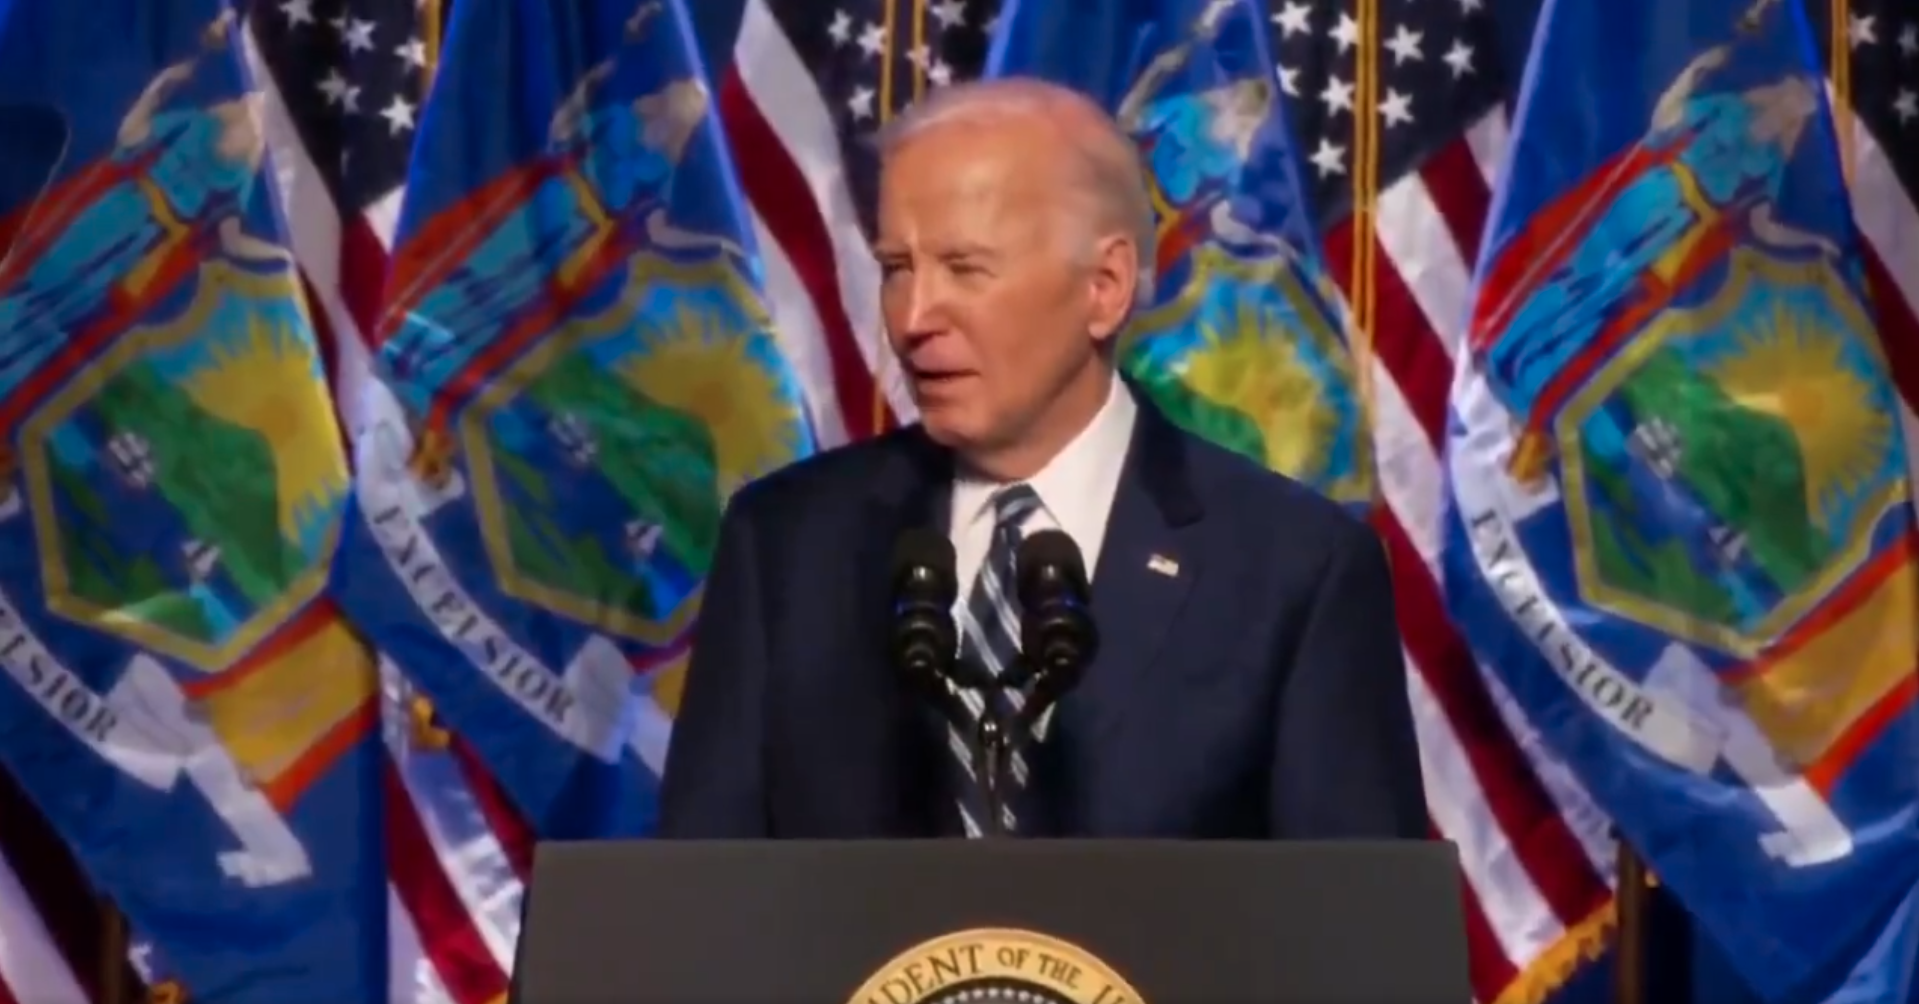 Biden Brings up Death of His Son While Speaking About Fallen Police Officers